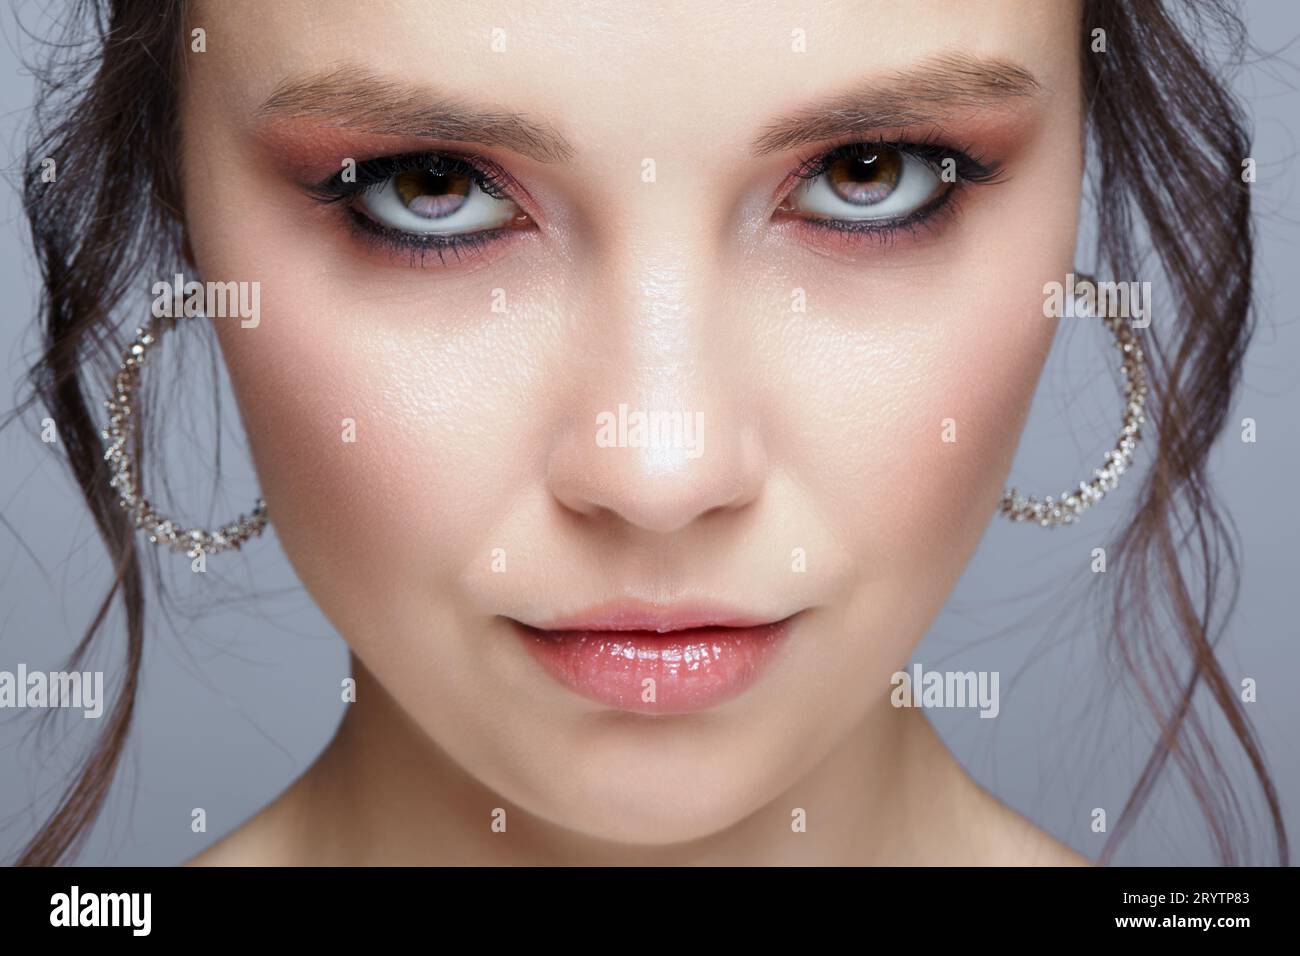 Closeup shot of human woman face. Female with  face and eyes beauty makeup with pink smoky eyes eye shadows Stock Photo